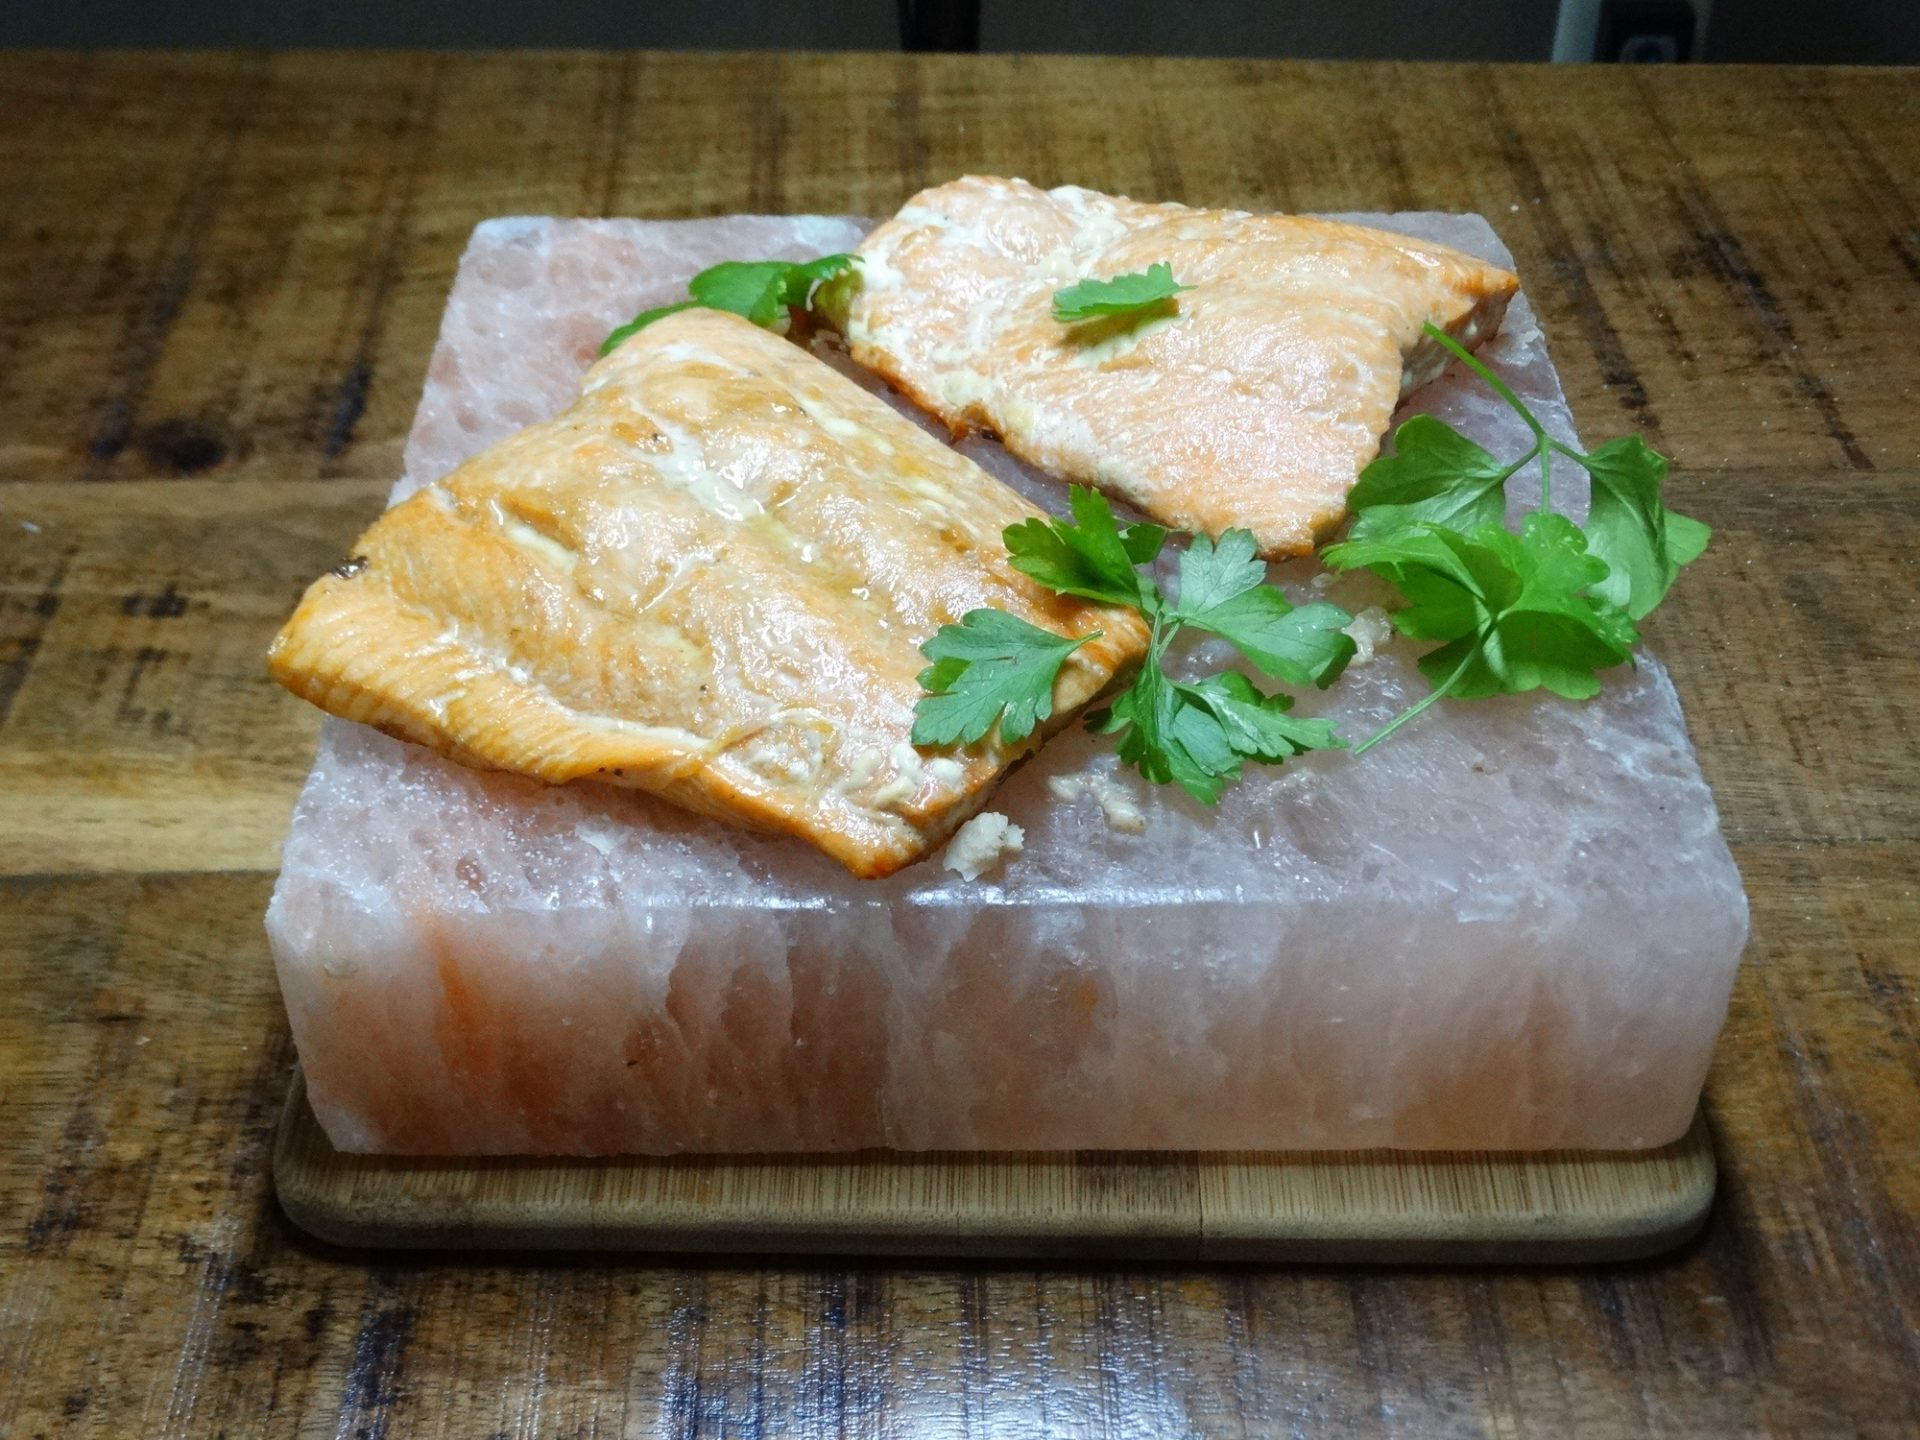 You'll impress everyone with this salt block salmon recipe, so prepare yourself to receive much praise when you serve this dish.